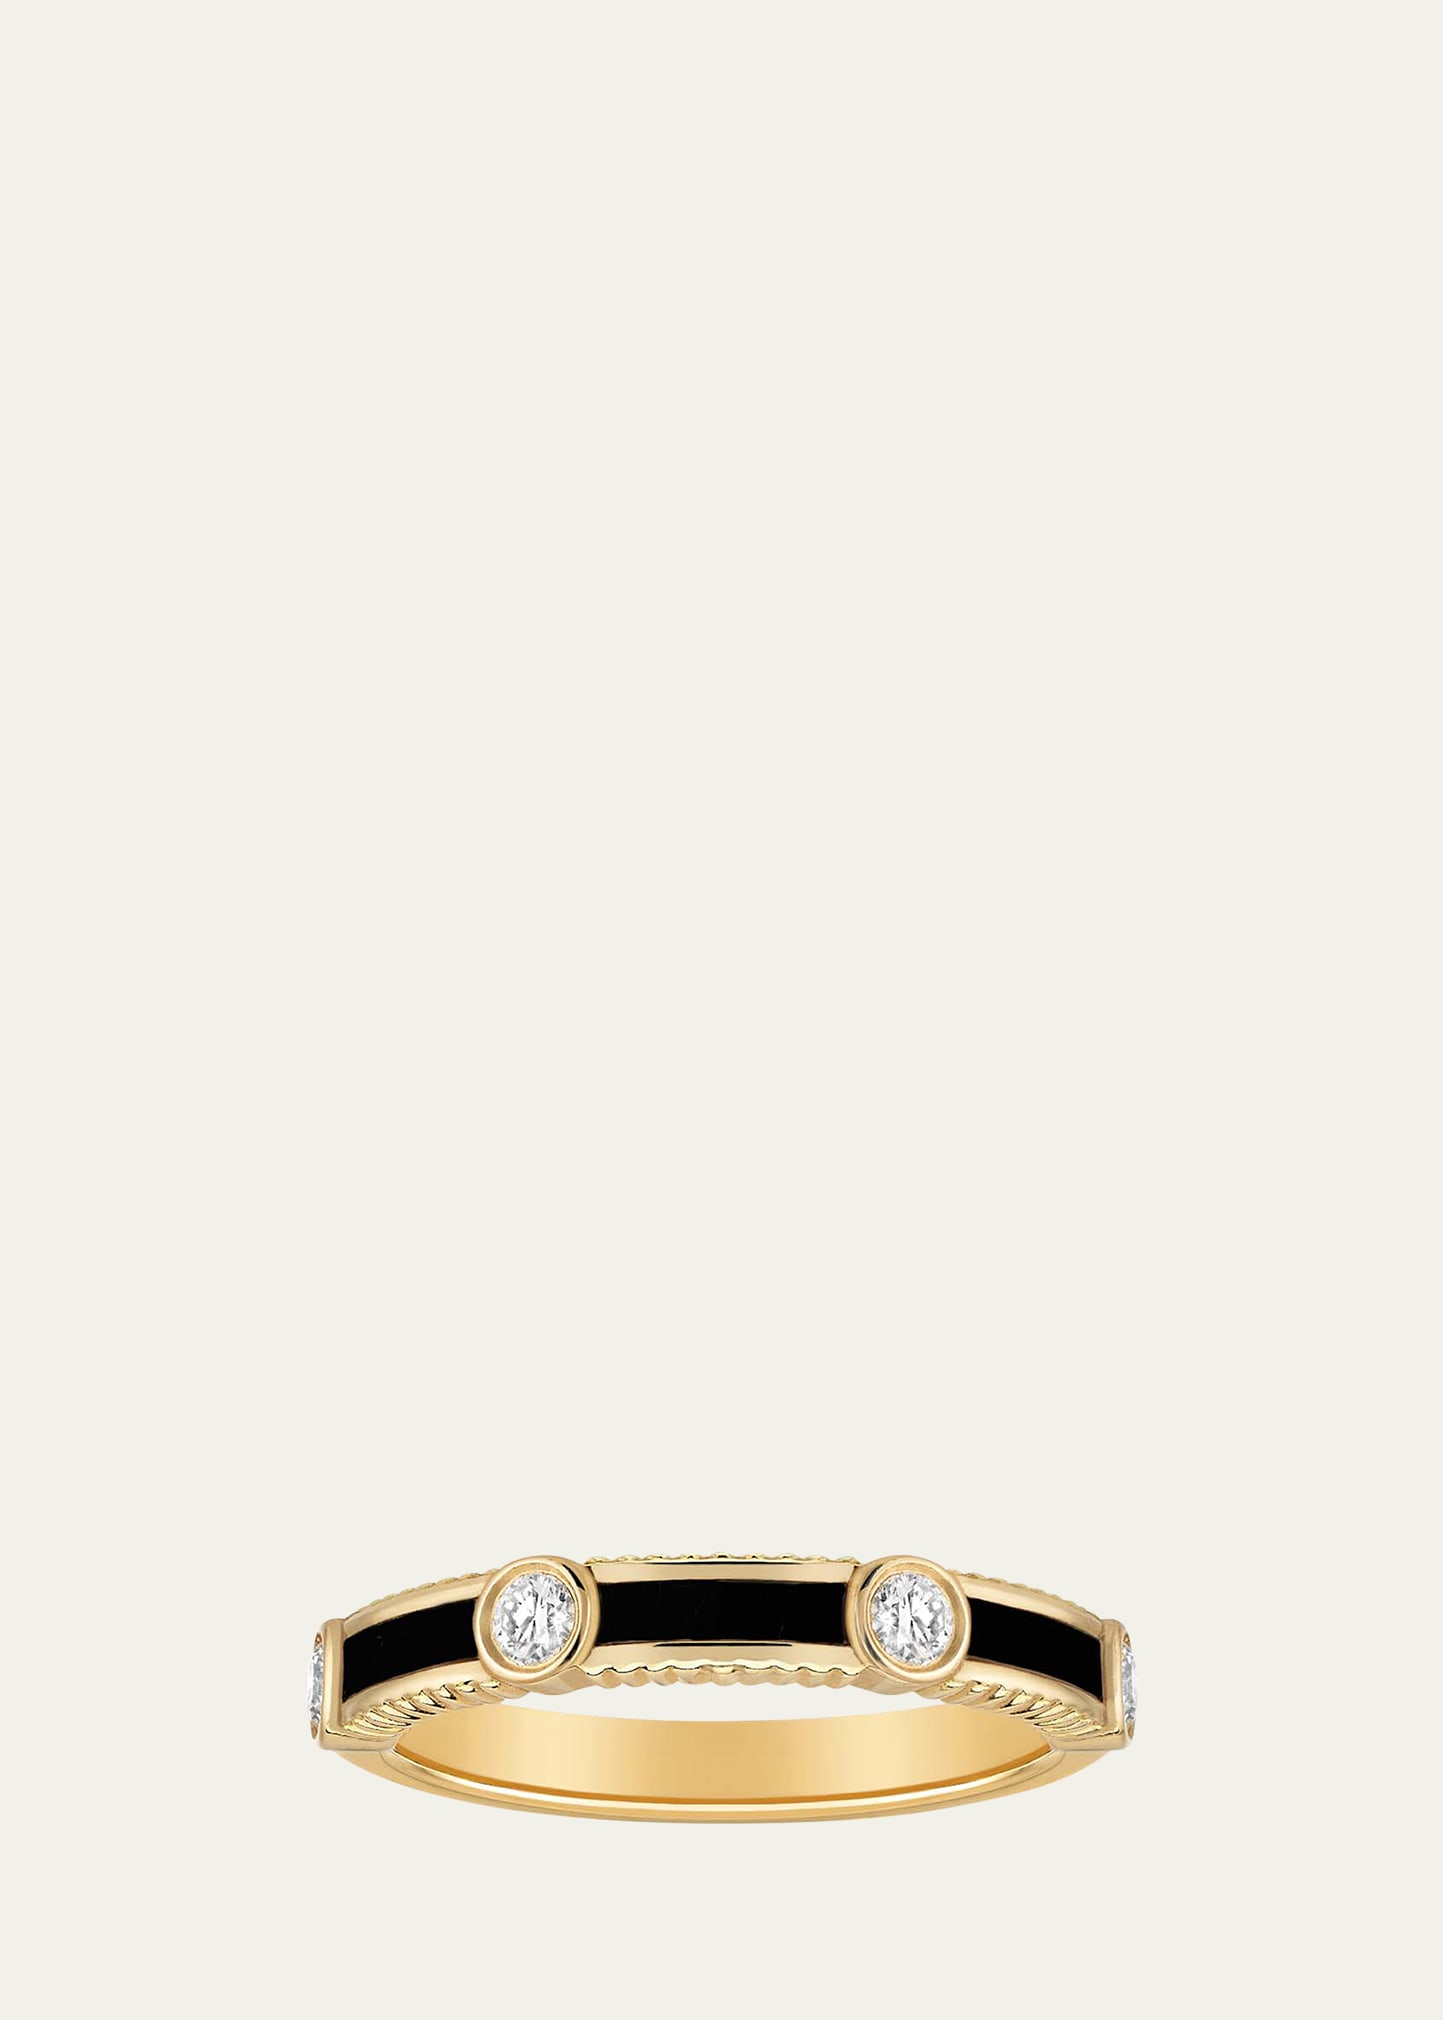 Rayon Ring in Onyx, Yellow Gold and Diamonds